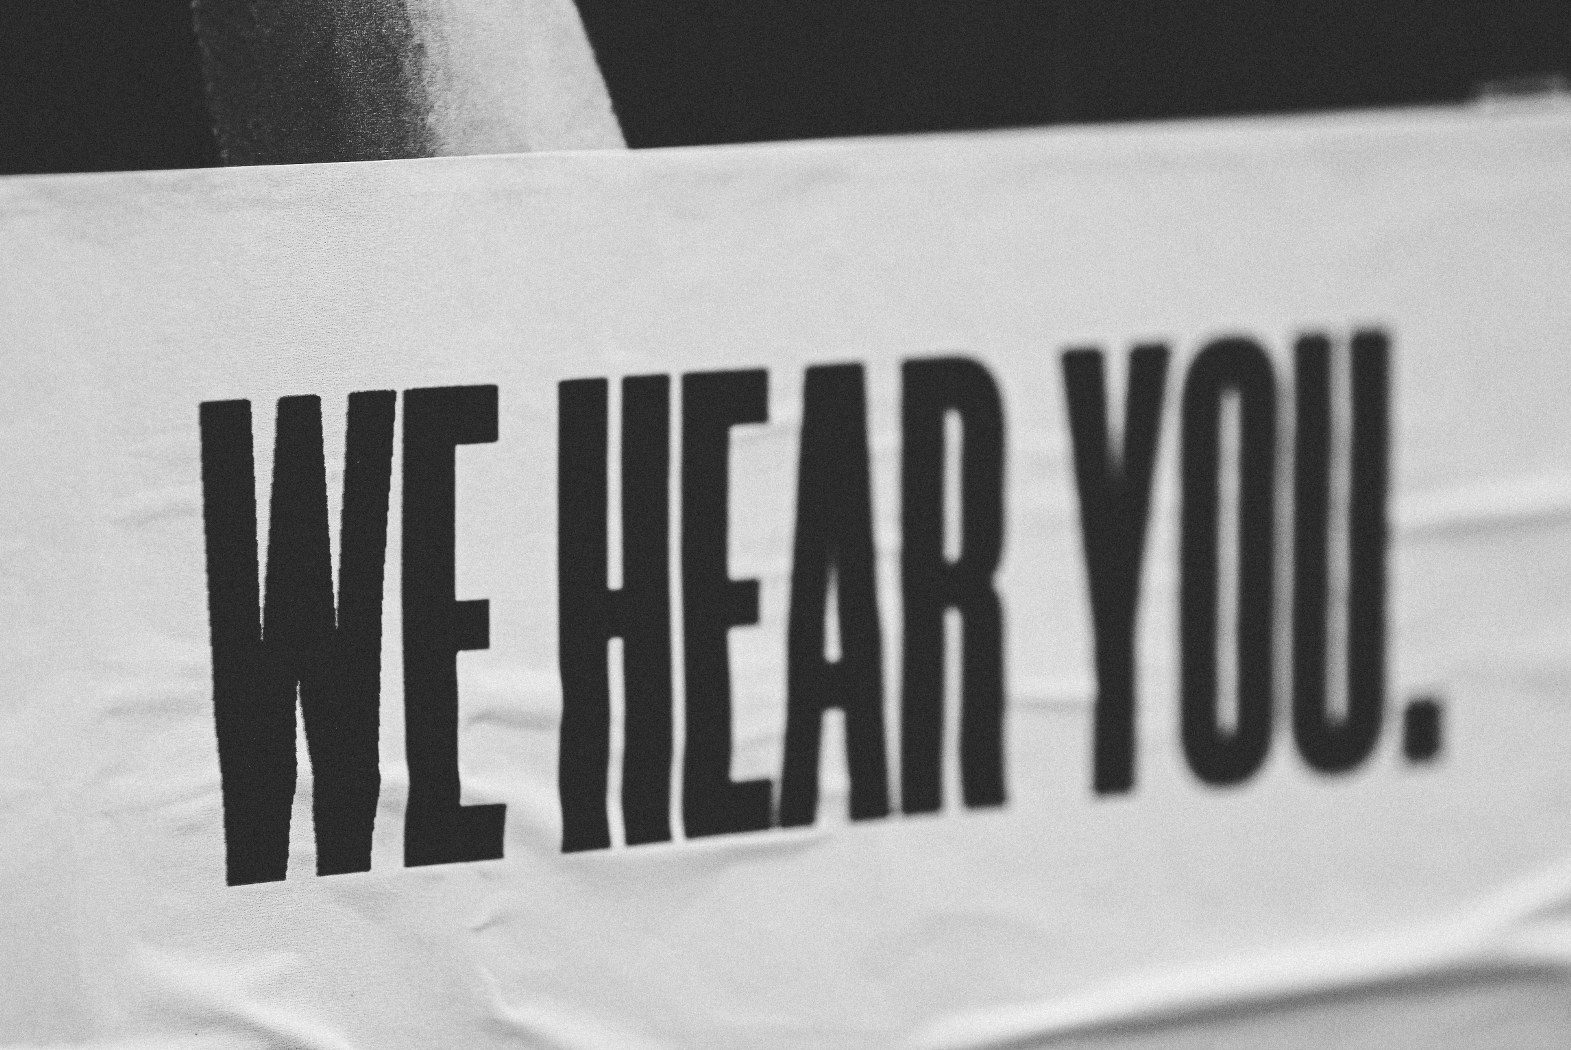 image of a sign that says "we hear you" from a patient satisfaction survey conducted by a call center for healthcare